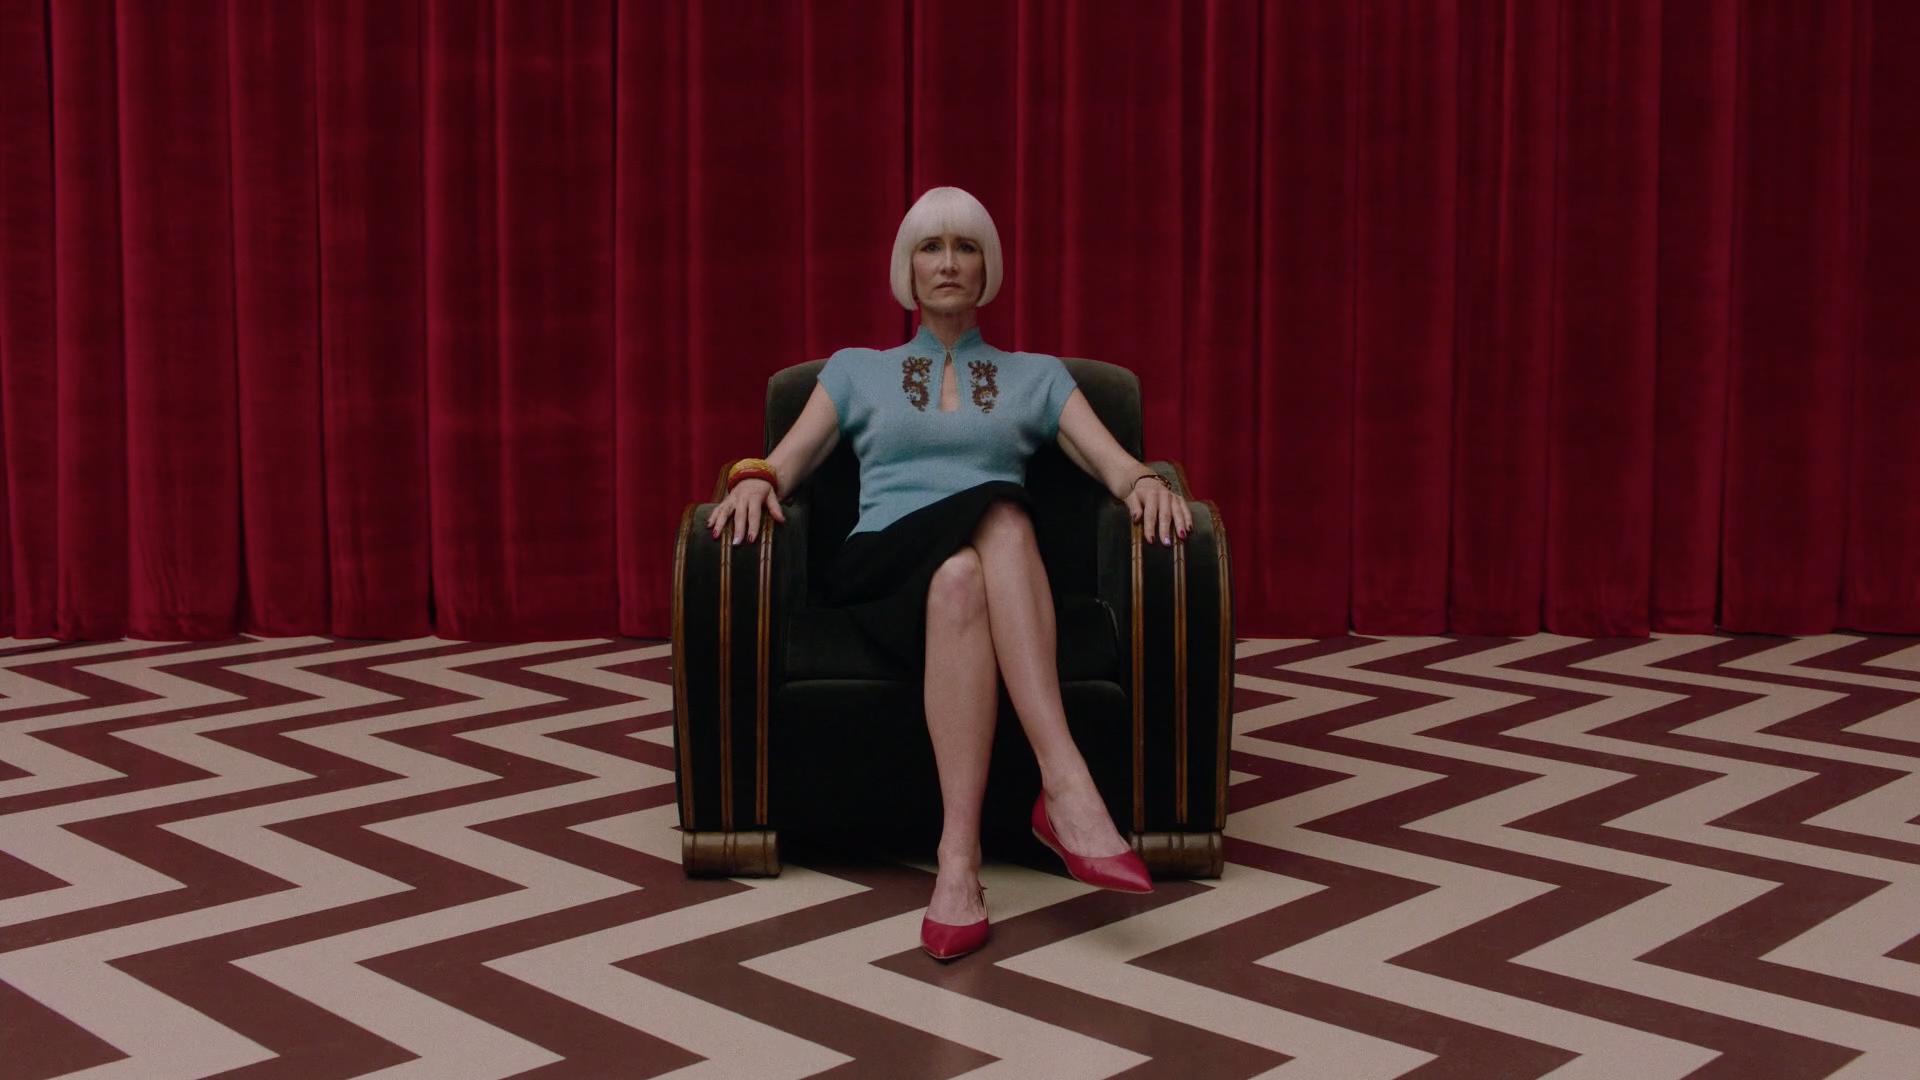 Load 4 More Imagesgrid View - Twin Peaks The Return Episode 16 , HD Wallpaper & Backgrounds